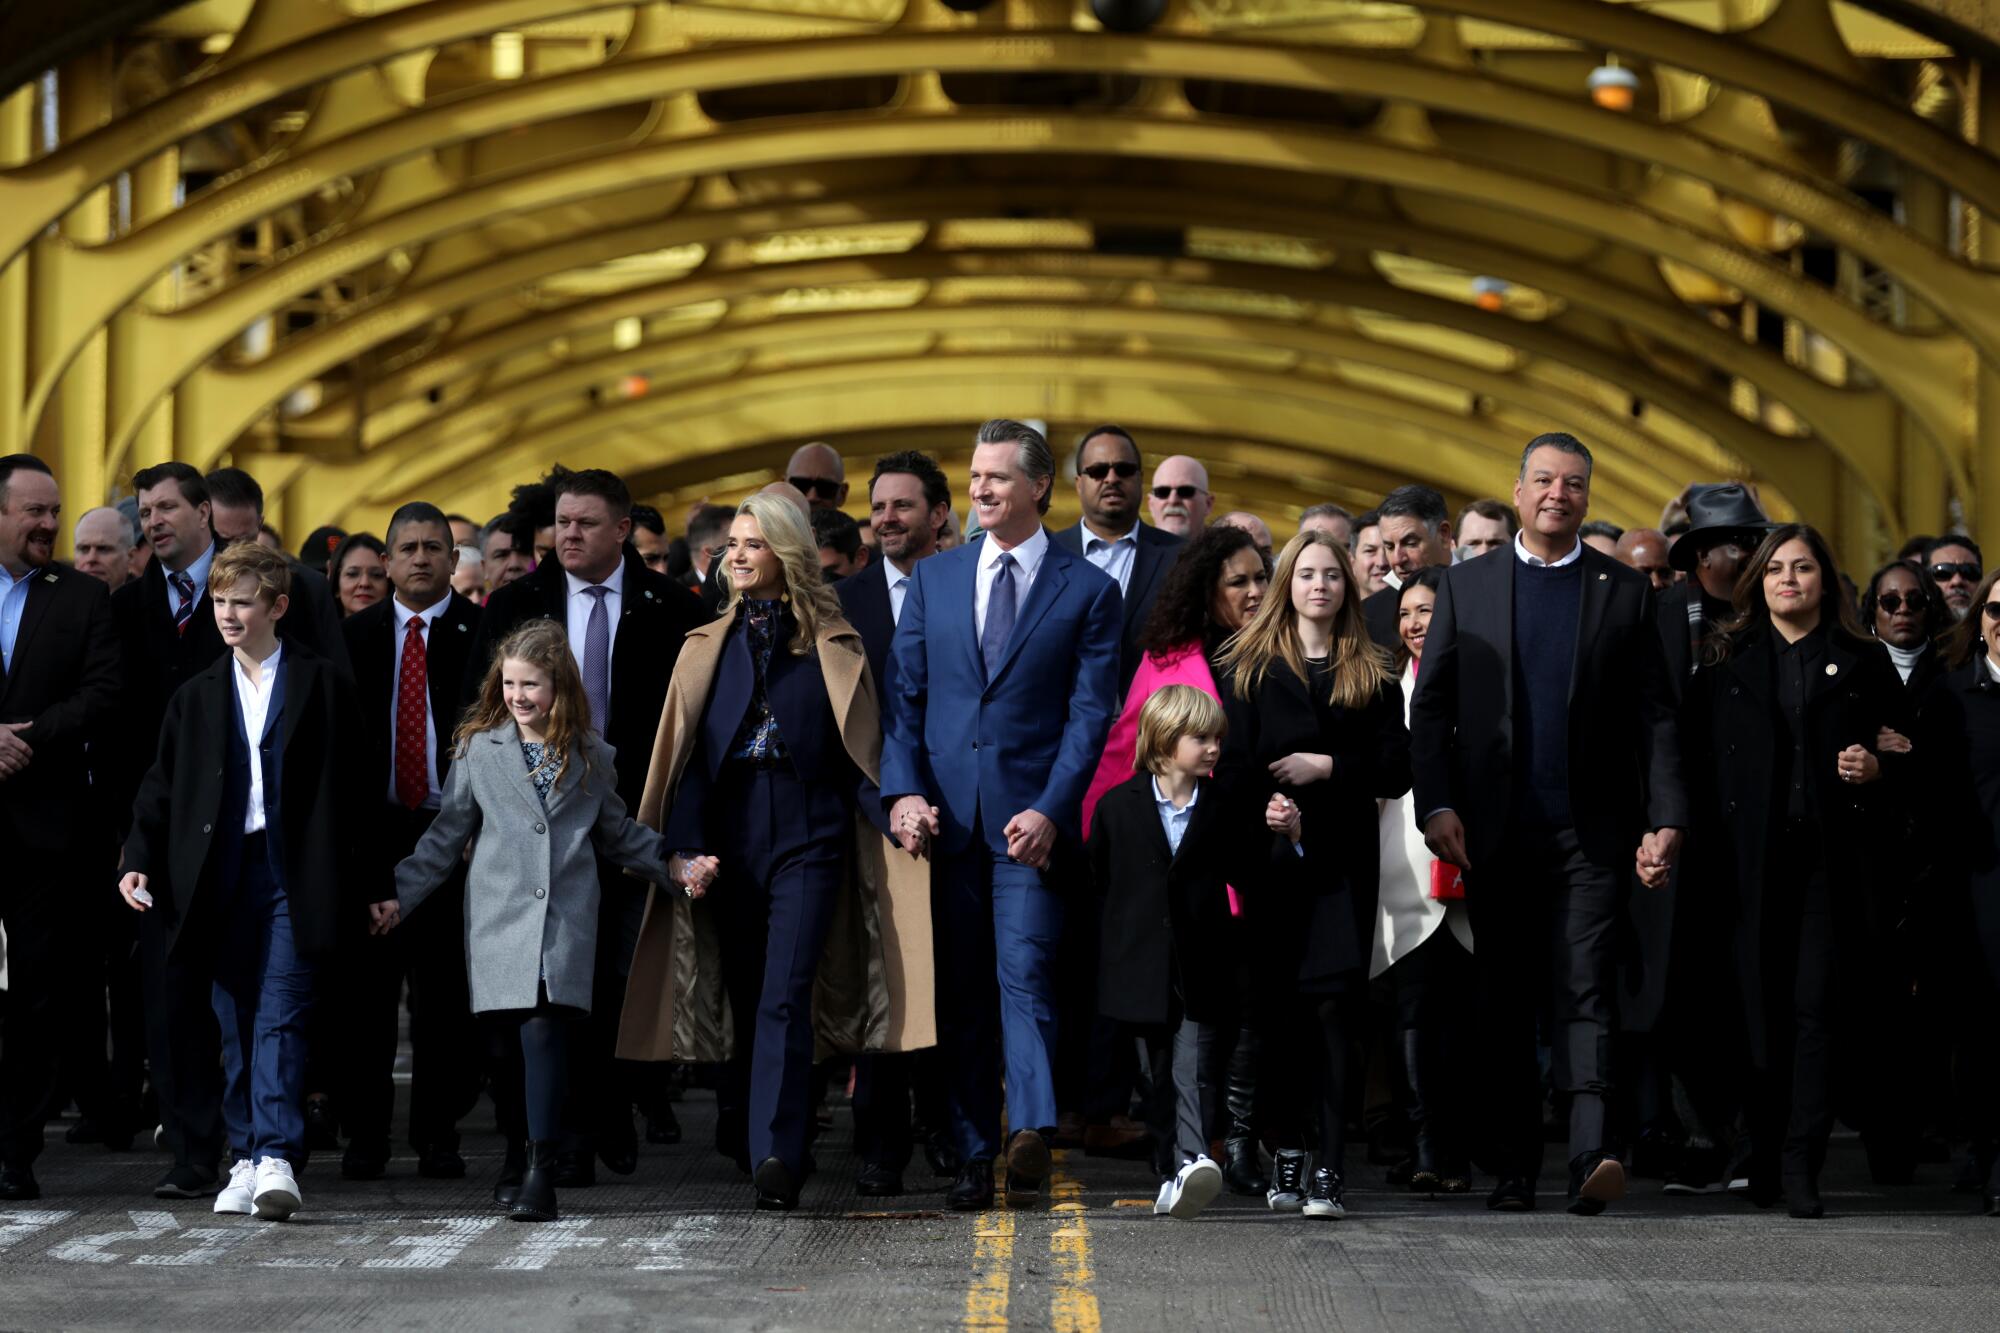 Gov. Gavin Newsom marches with others down a street